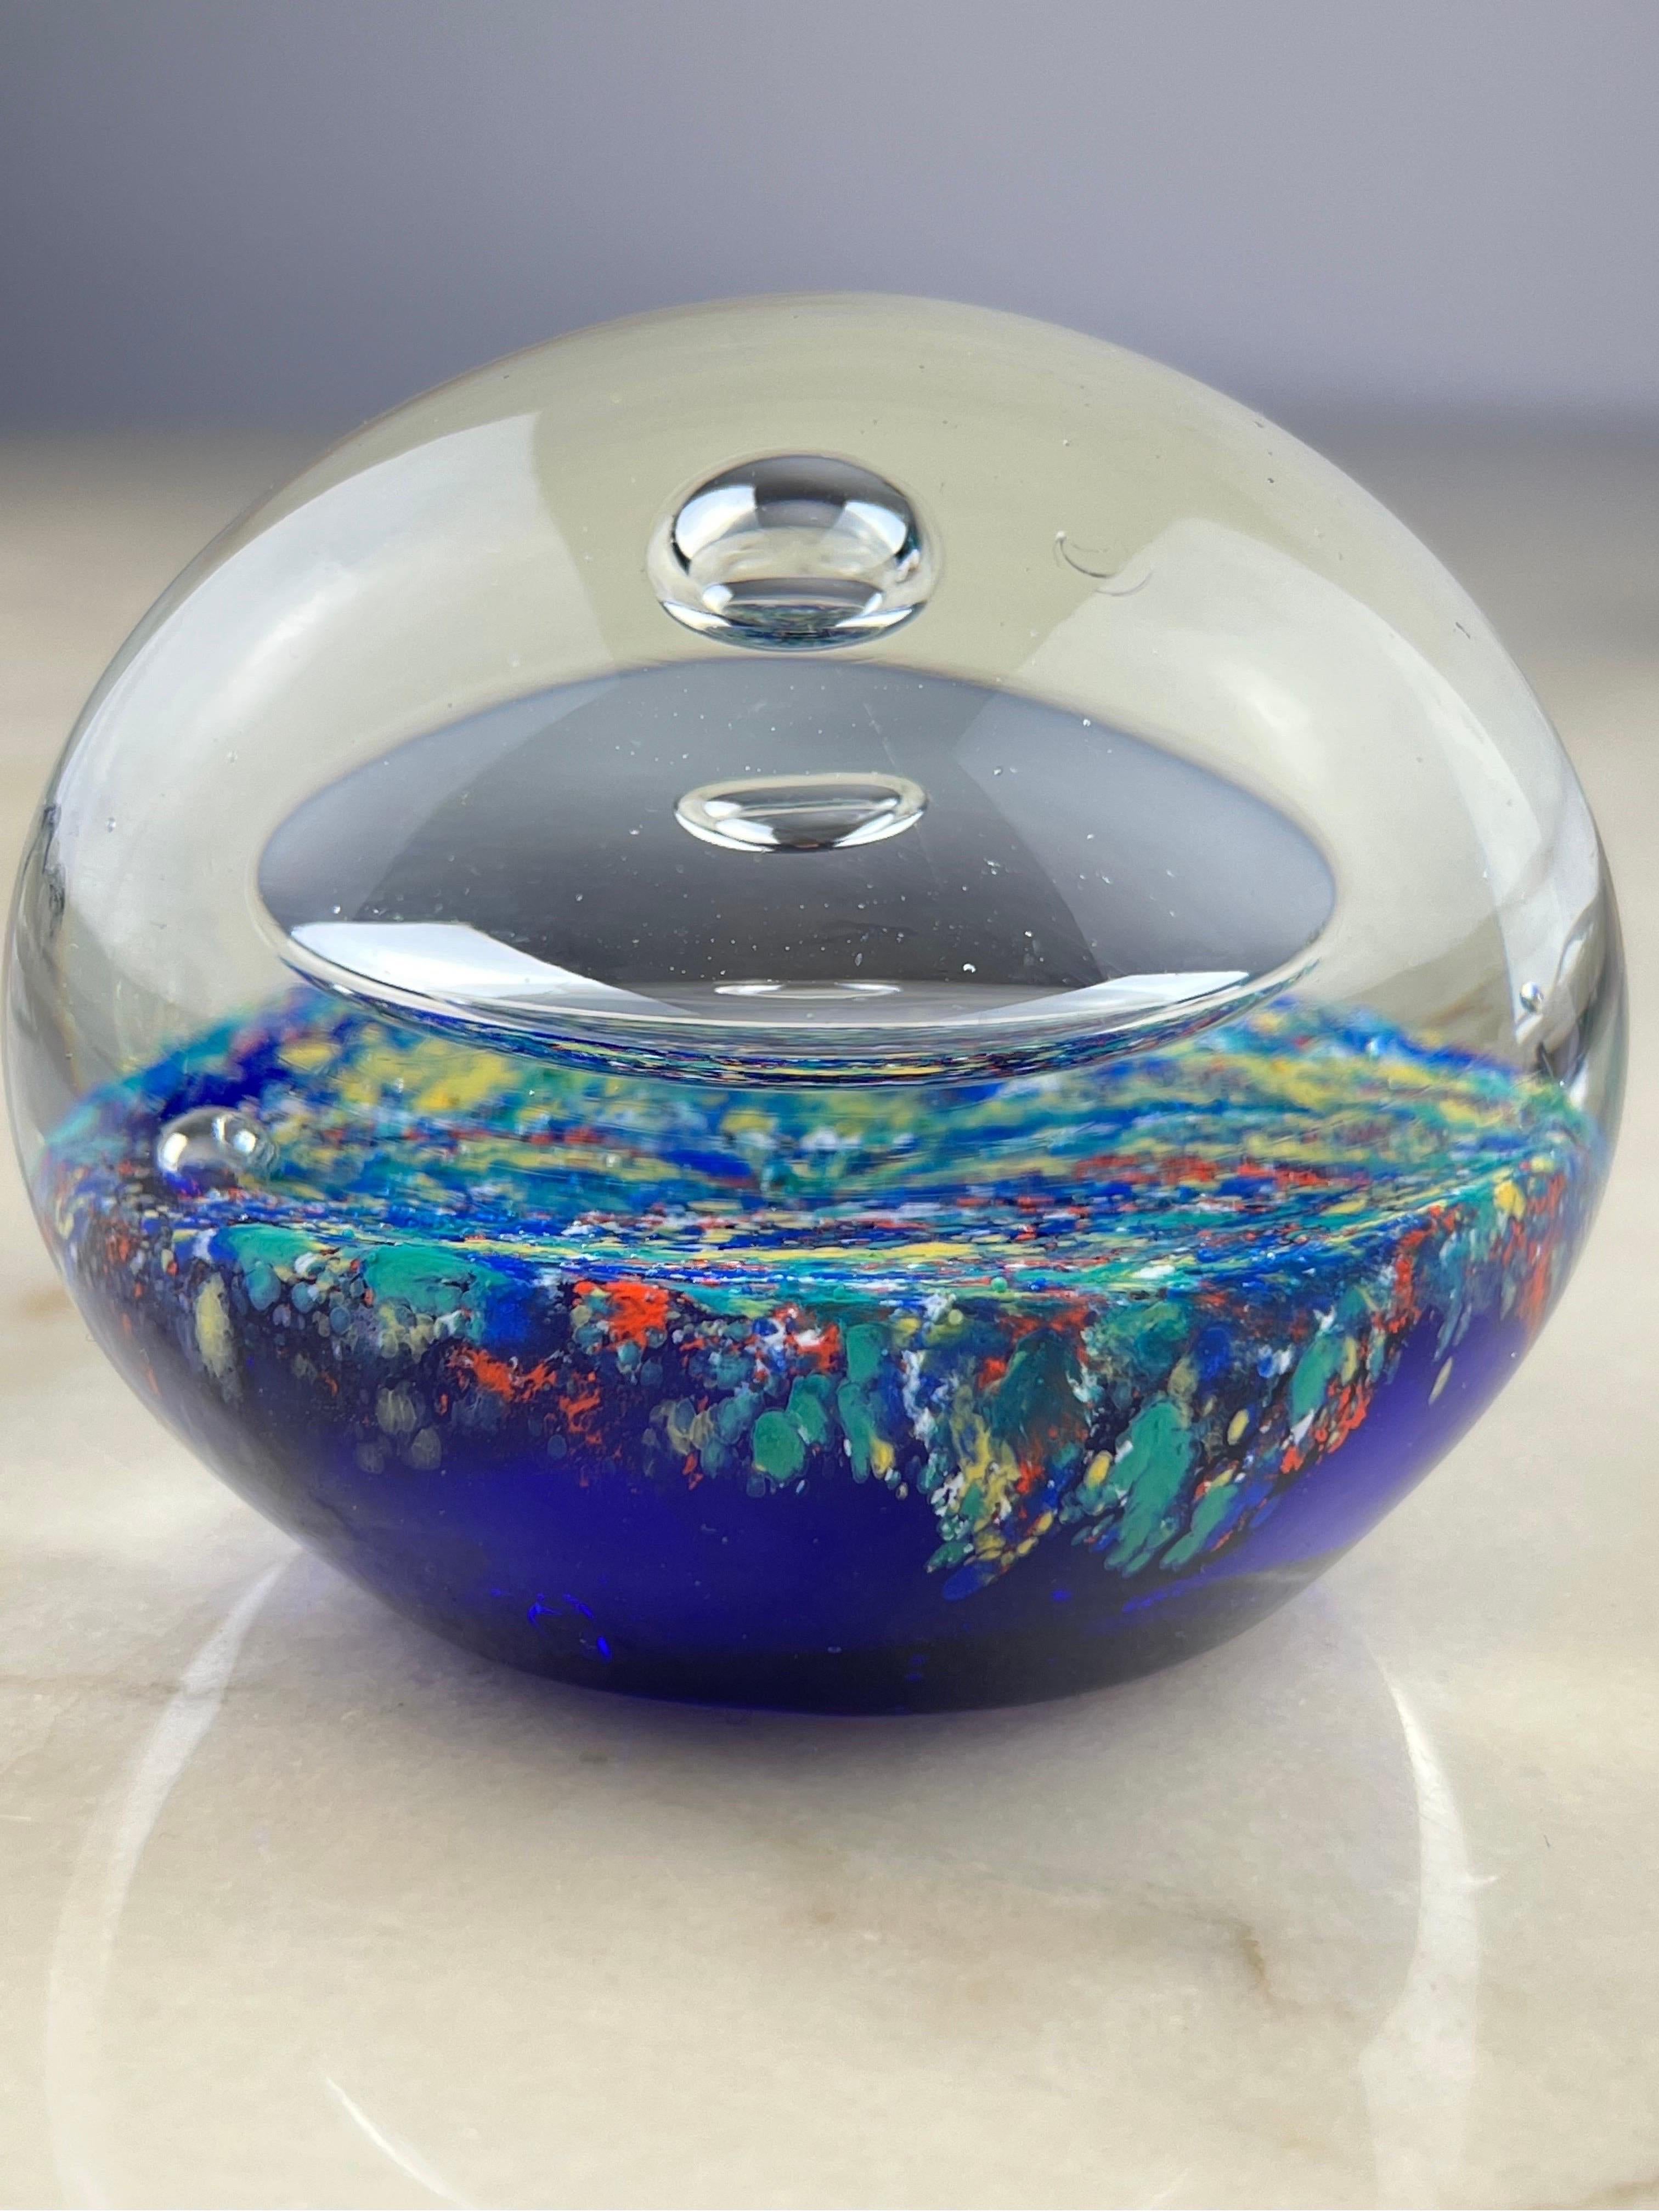 Two Murano glass paperweights, Italy, 1970s
They have different sizes: One has a diameter of 8.5 cm and a height of 6.5 cm; The other measures 8 x 7.5 cm.
Purchased by my grandfather in the 70s during a trip to Venice.
Very good condition. Murano